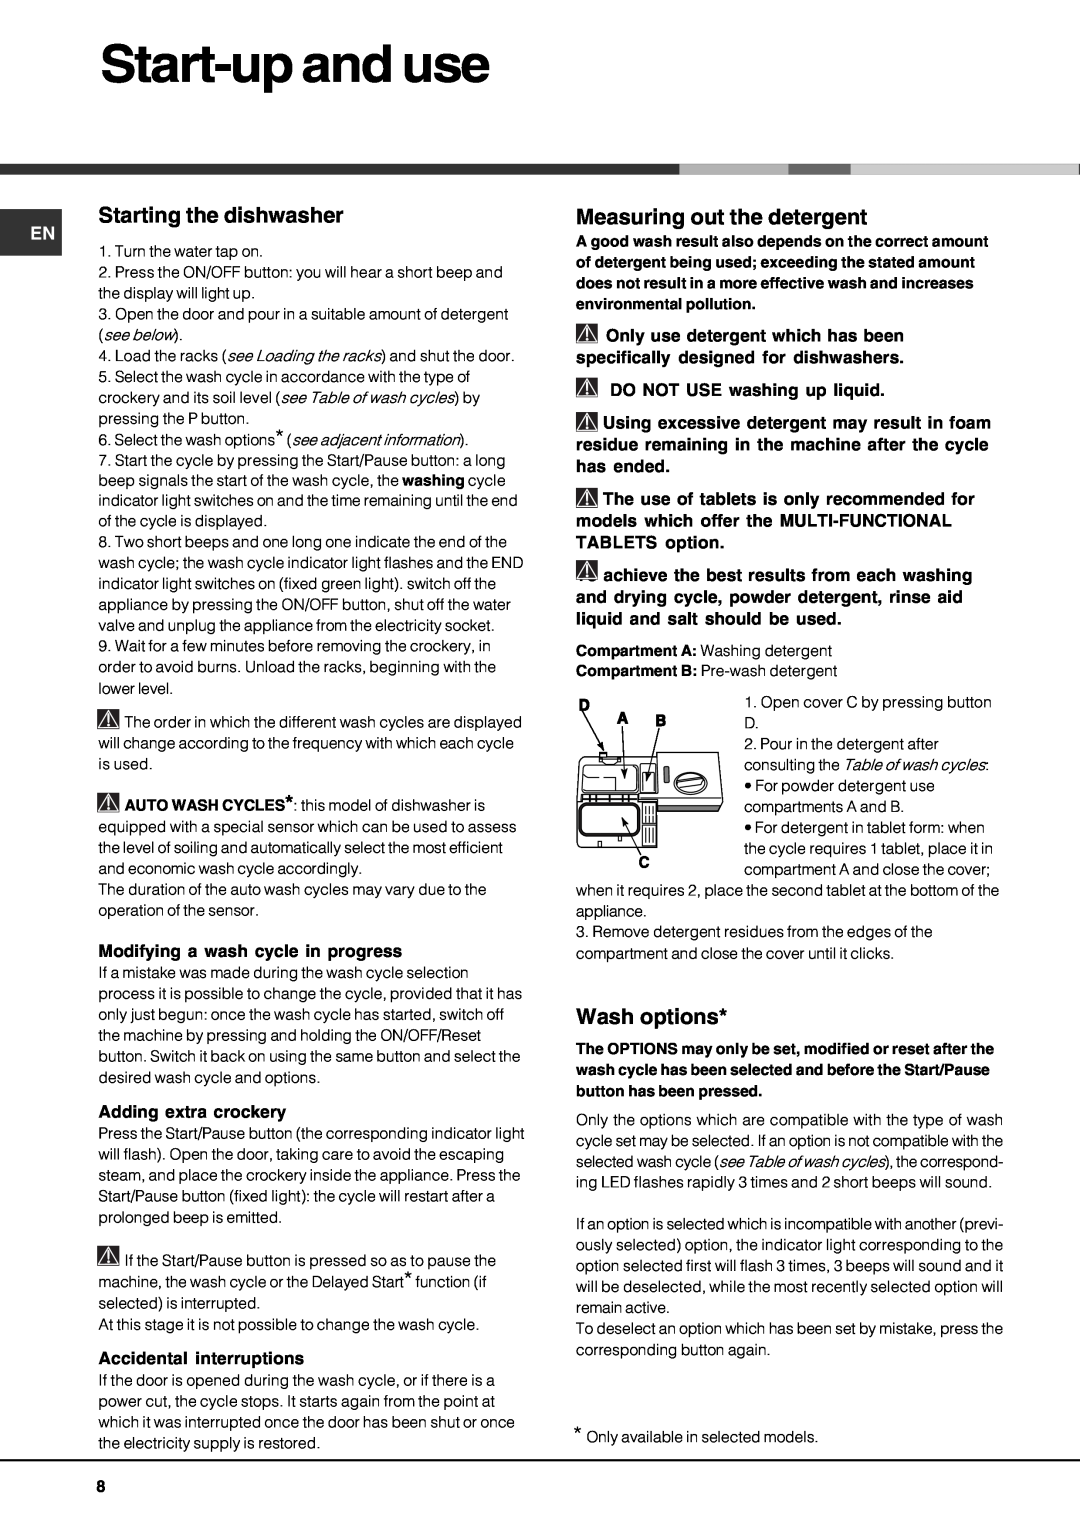 Hotpoint LFZ 338 A/HA IX manual Start-upand use, Starting the dishwasher, Measuring out the detergent, Wash options 